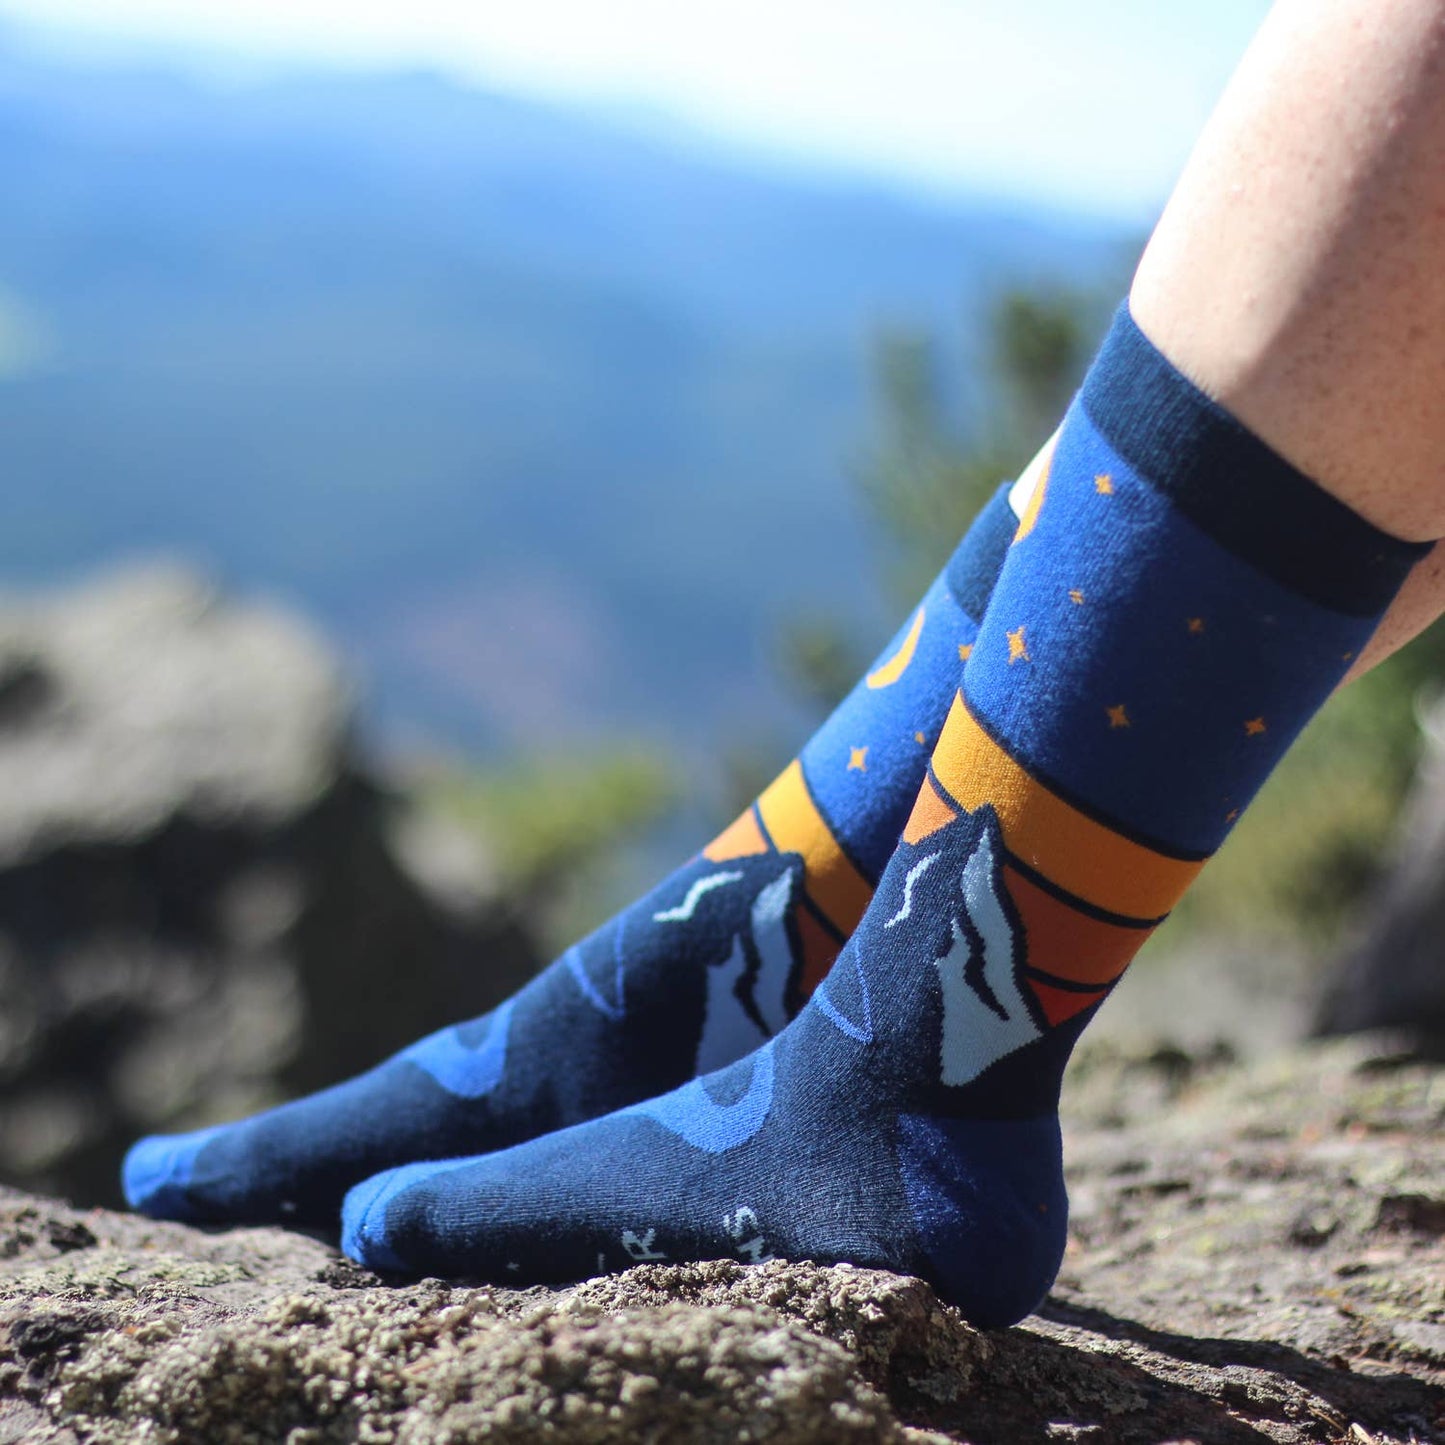 Lavley - I'd Rather Be In The Mountains Socks